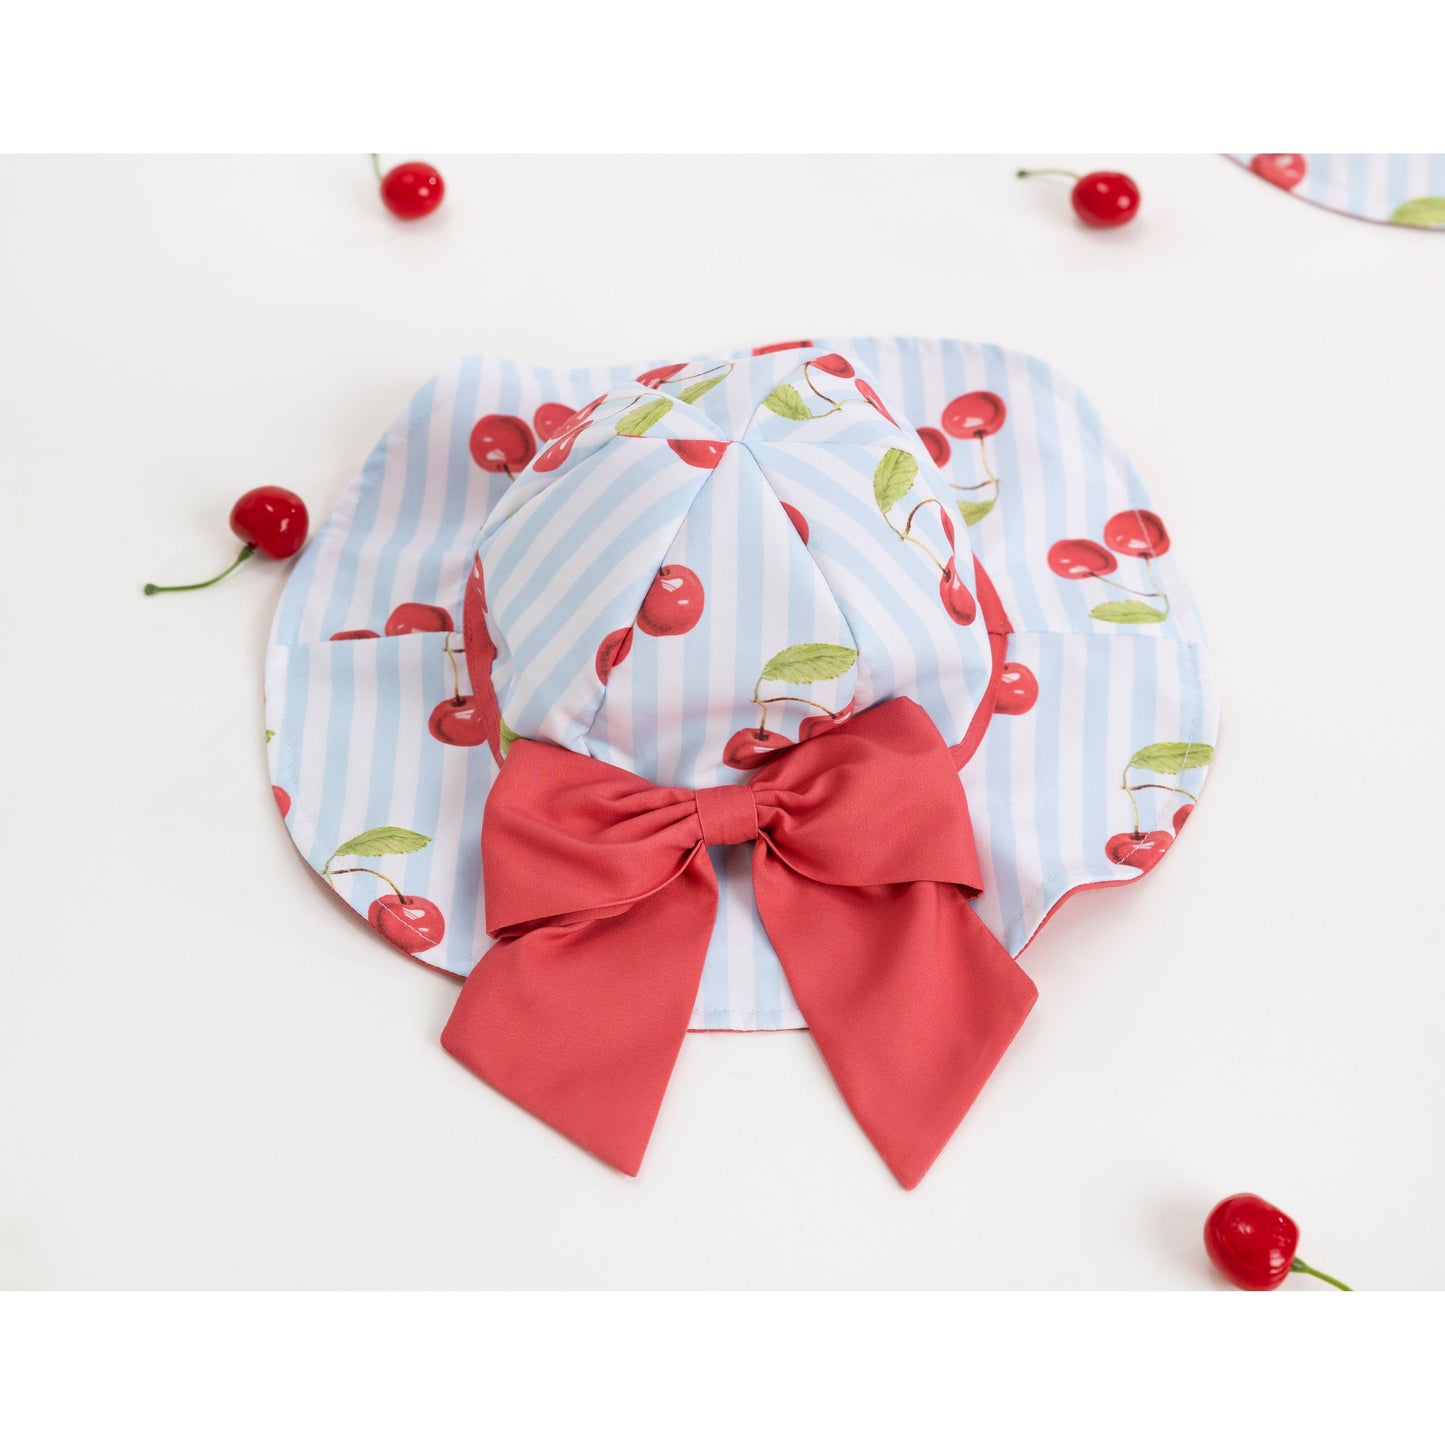 Load image into Gallery viewer, Meia Pata girls sun hat in Cherries print - Adora
